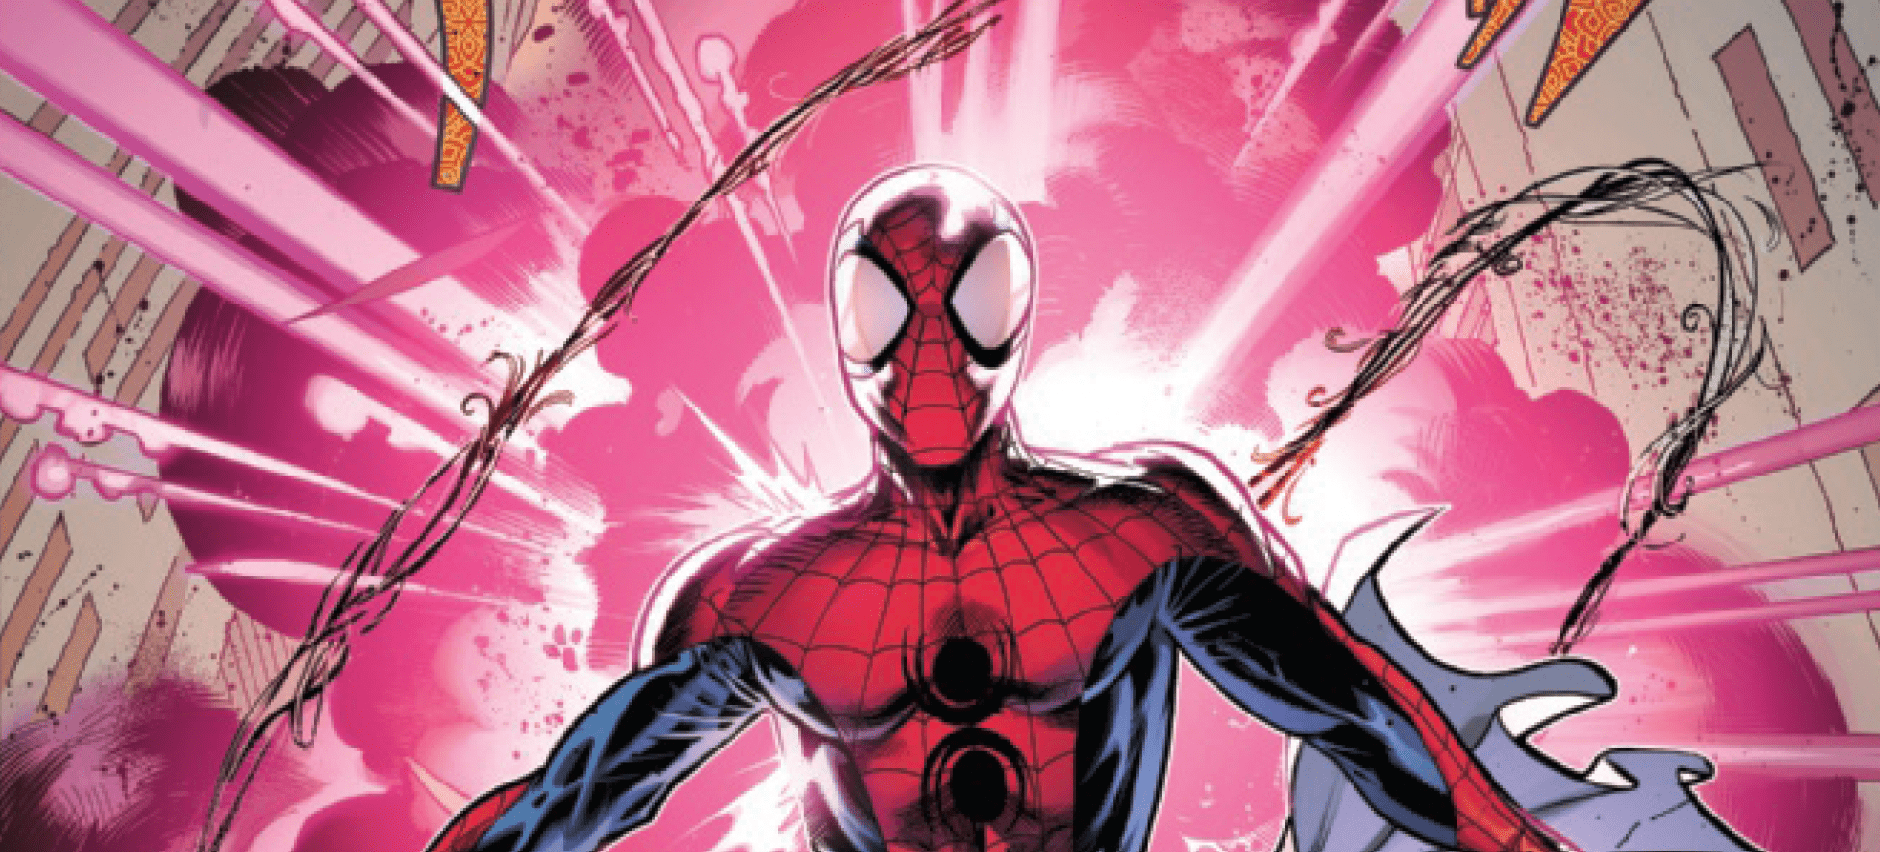 EXCLUSIVE Marvel Preview: Spider-Man: India #1